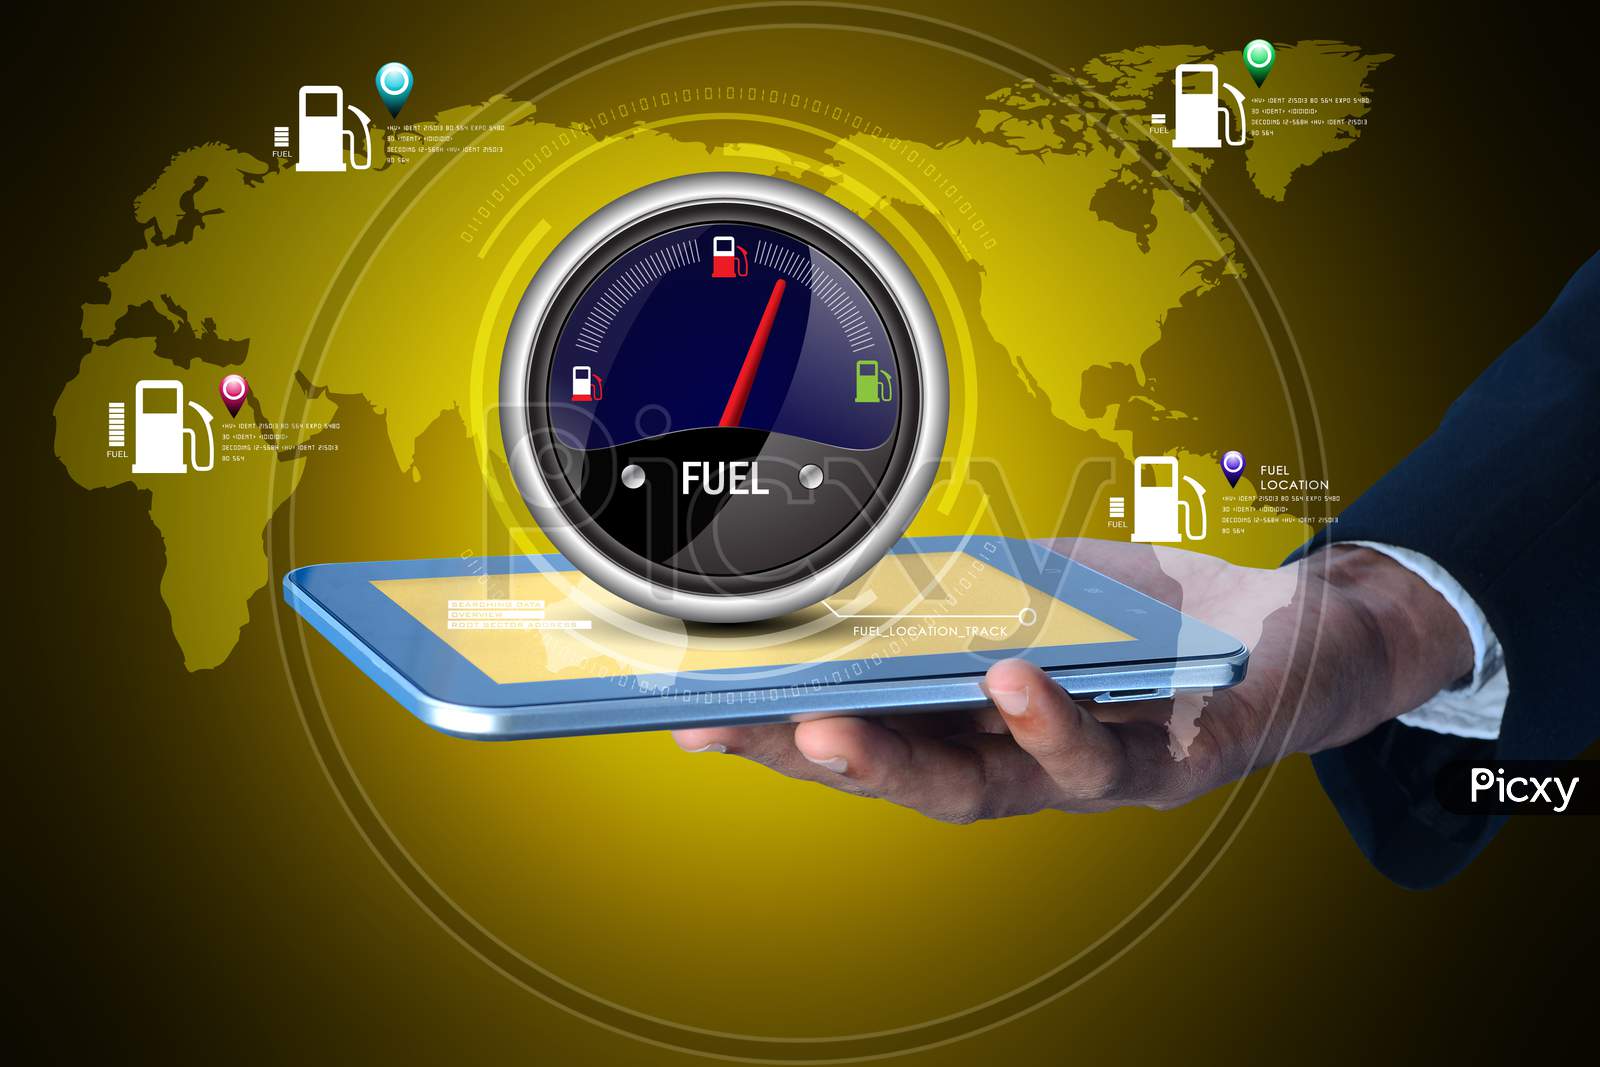 Close up shot of a person's hand holding iPad or Tablet with a Fuel Indicator